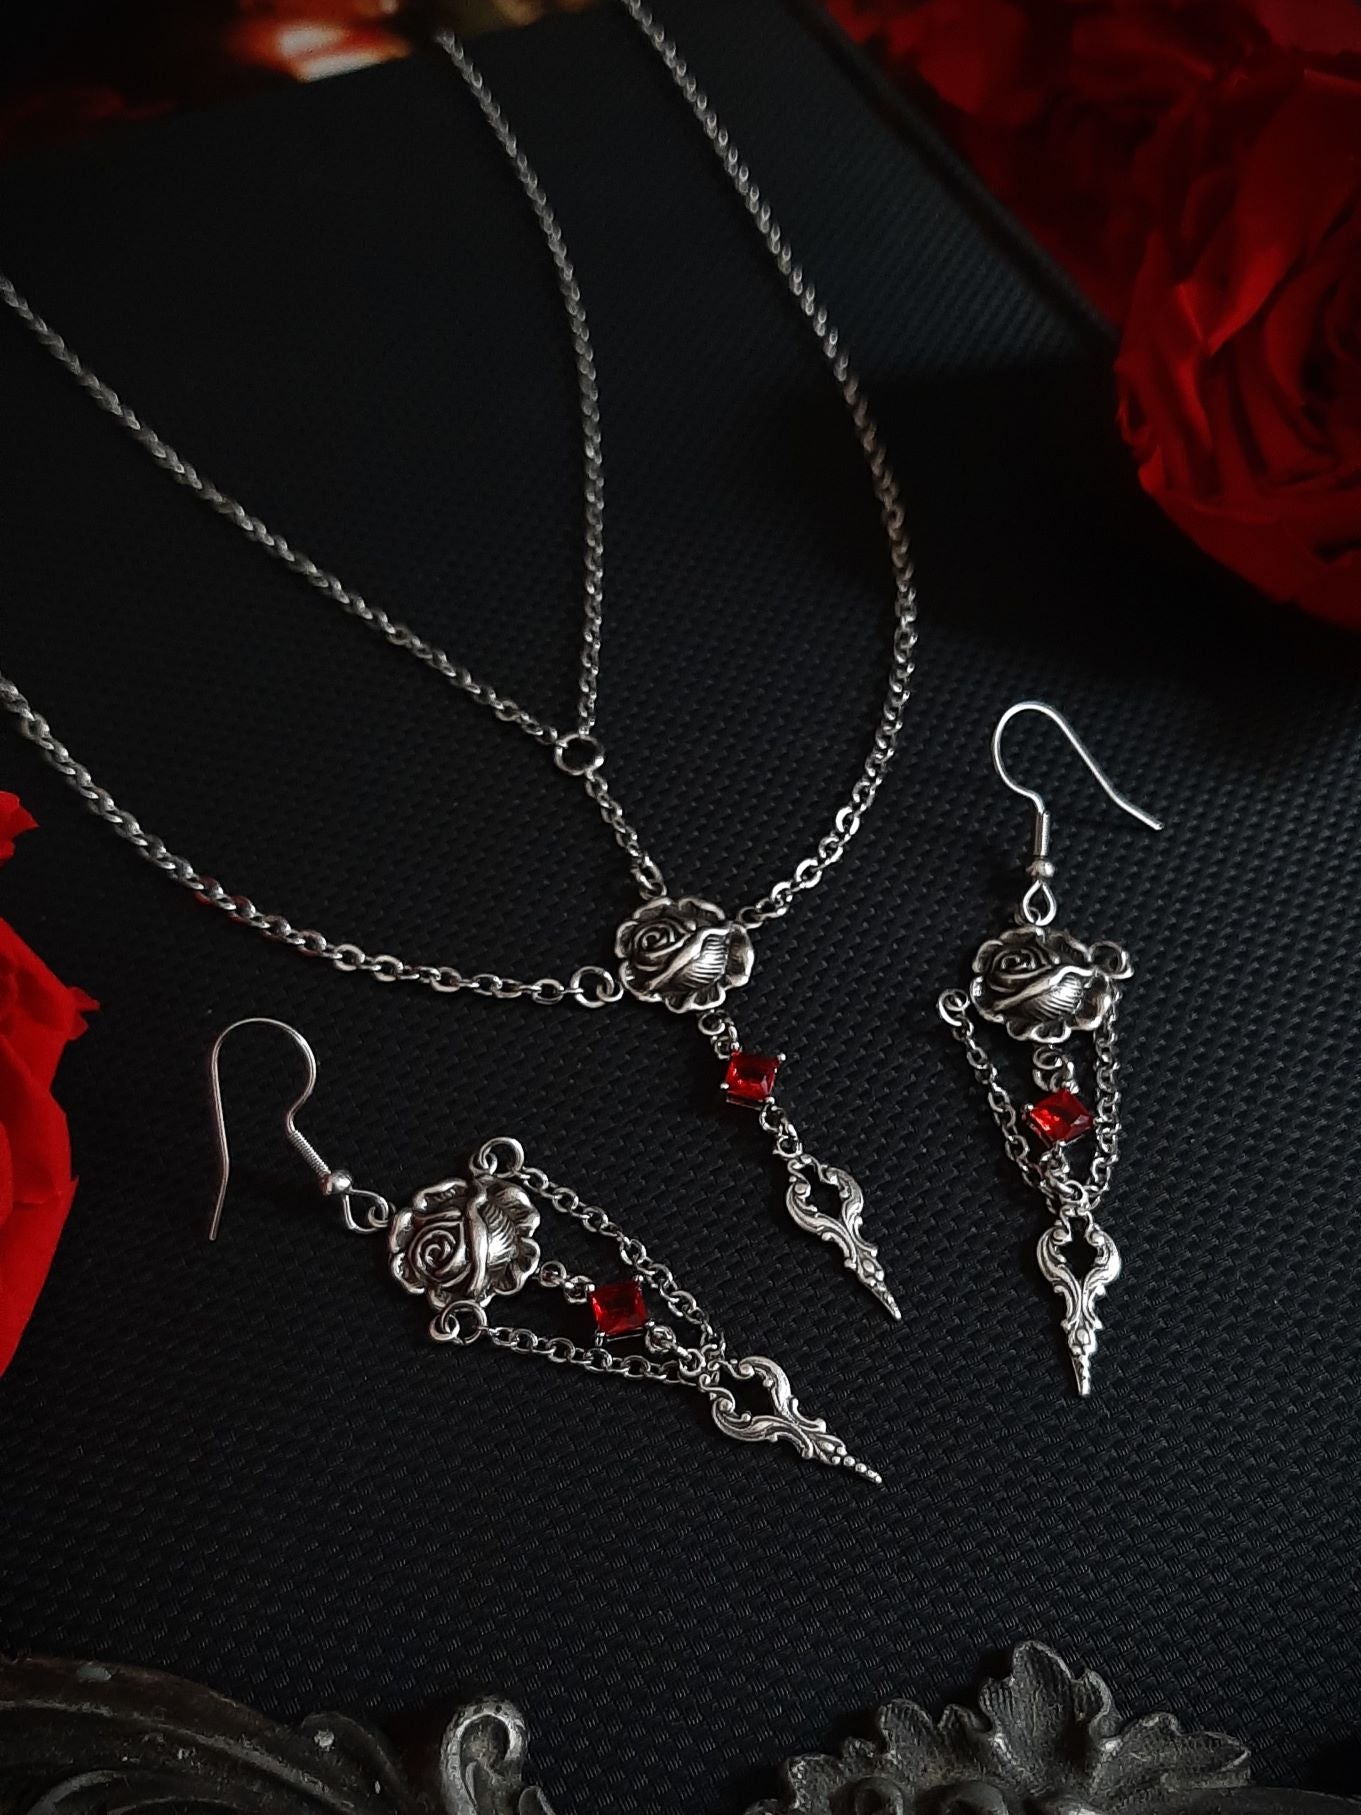 𝕻𝖔𝖎𝖘𝖊 rose double necklace- 𝖔𝖓𝖊 𝖑𝖊𝖋𝖙 !